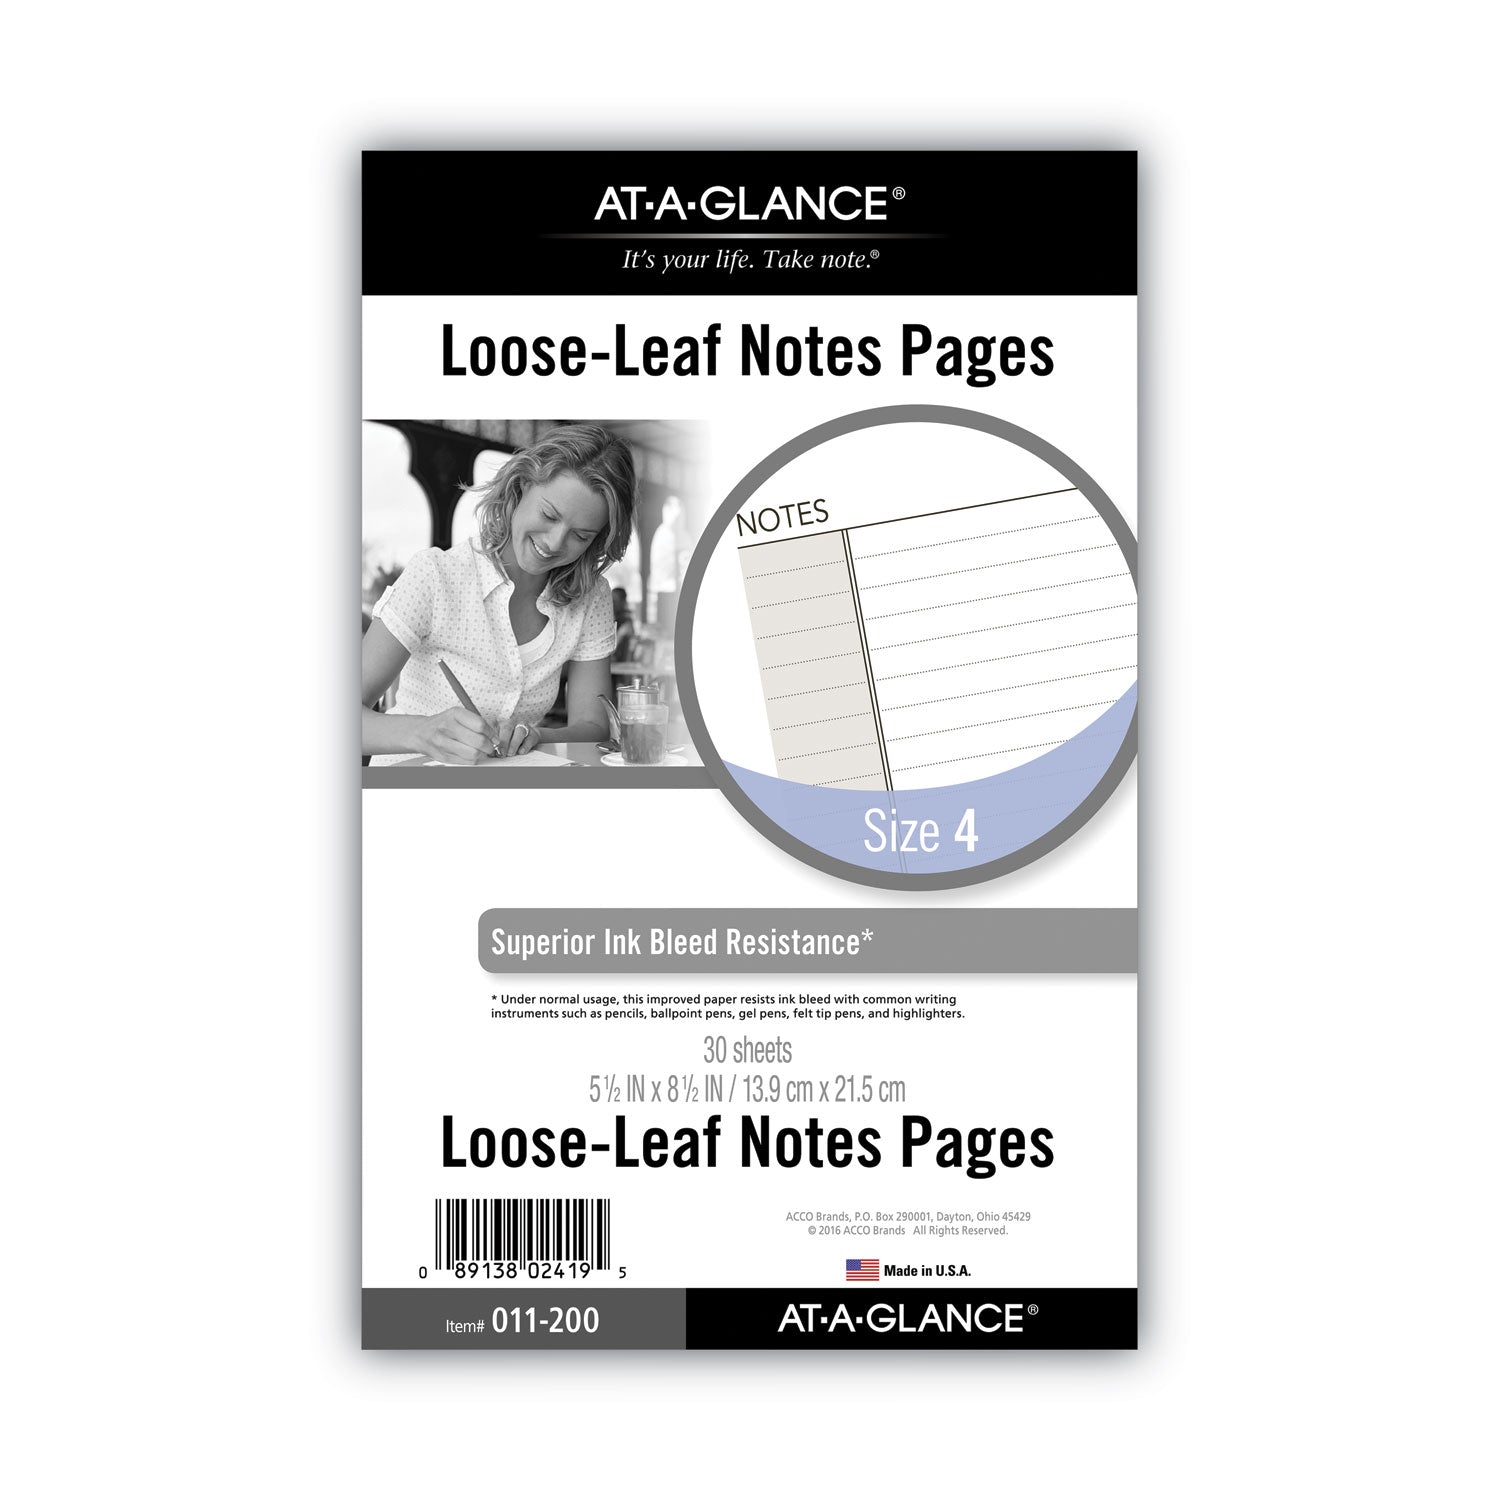 AT-A-GLANCE Lined Notes Pages for Planners/Organizers, 8.5 x 5.5, White Sheets, Undated Flipcost